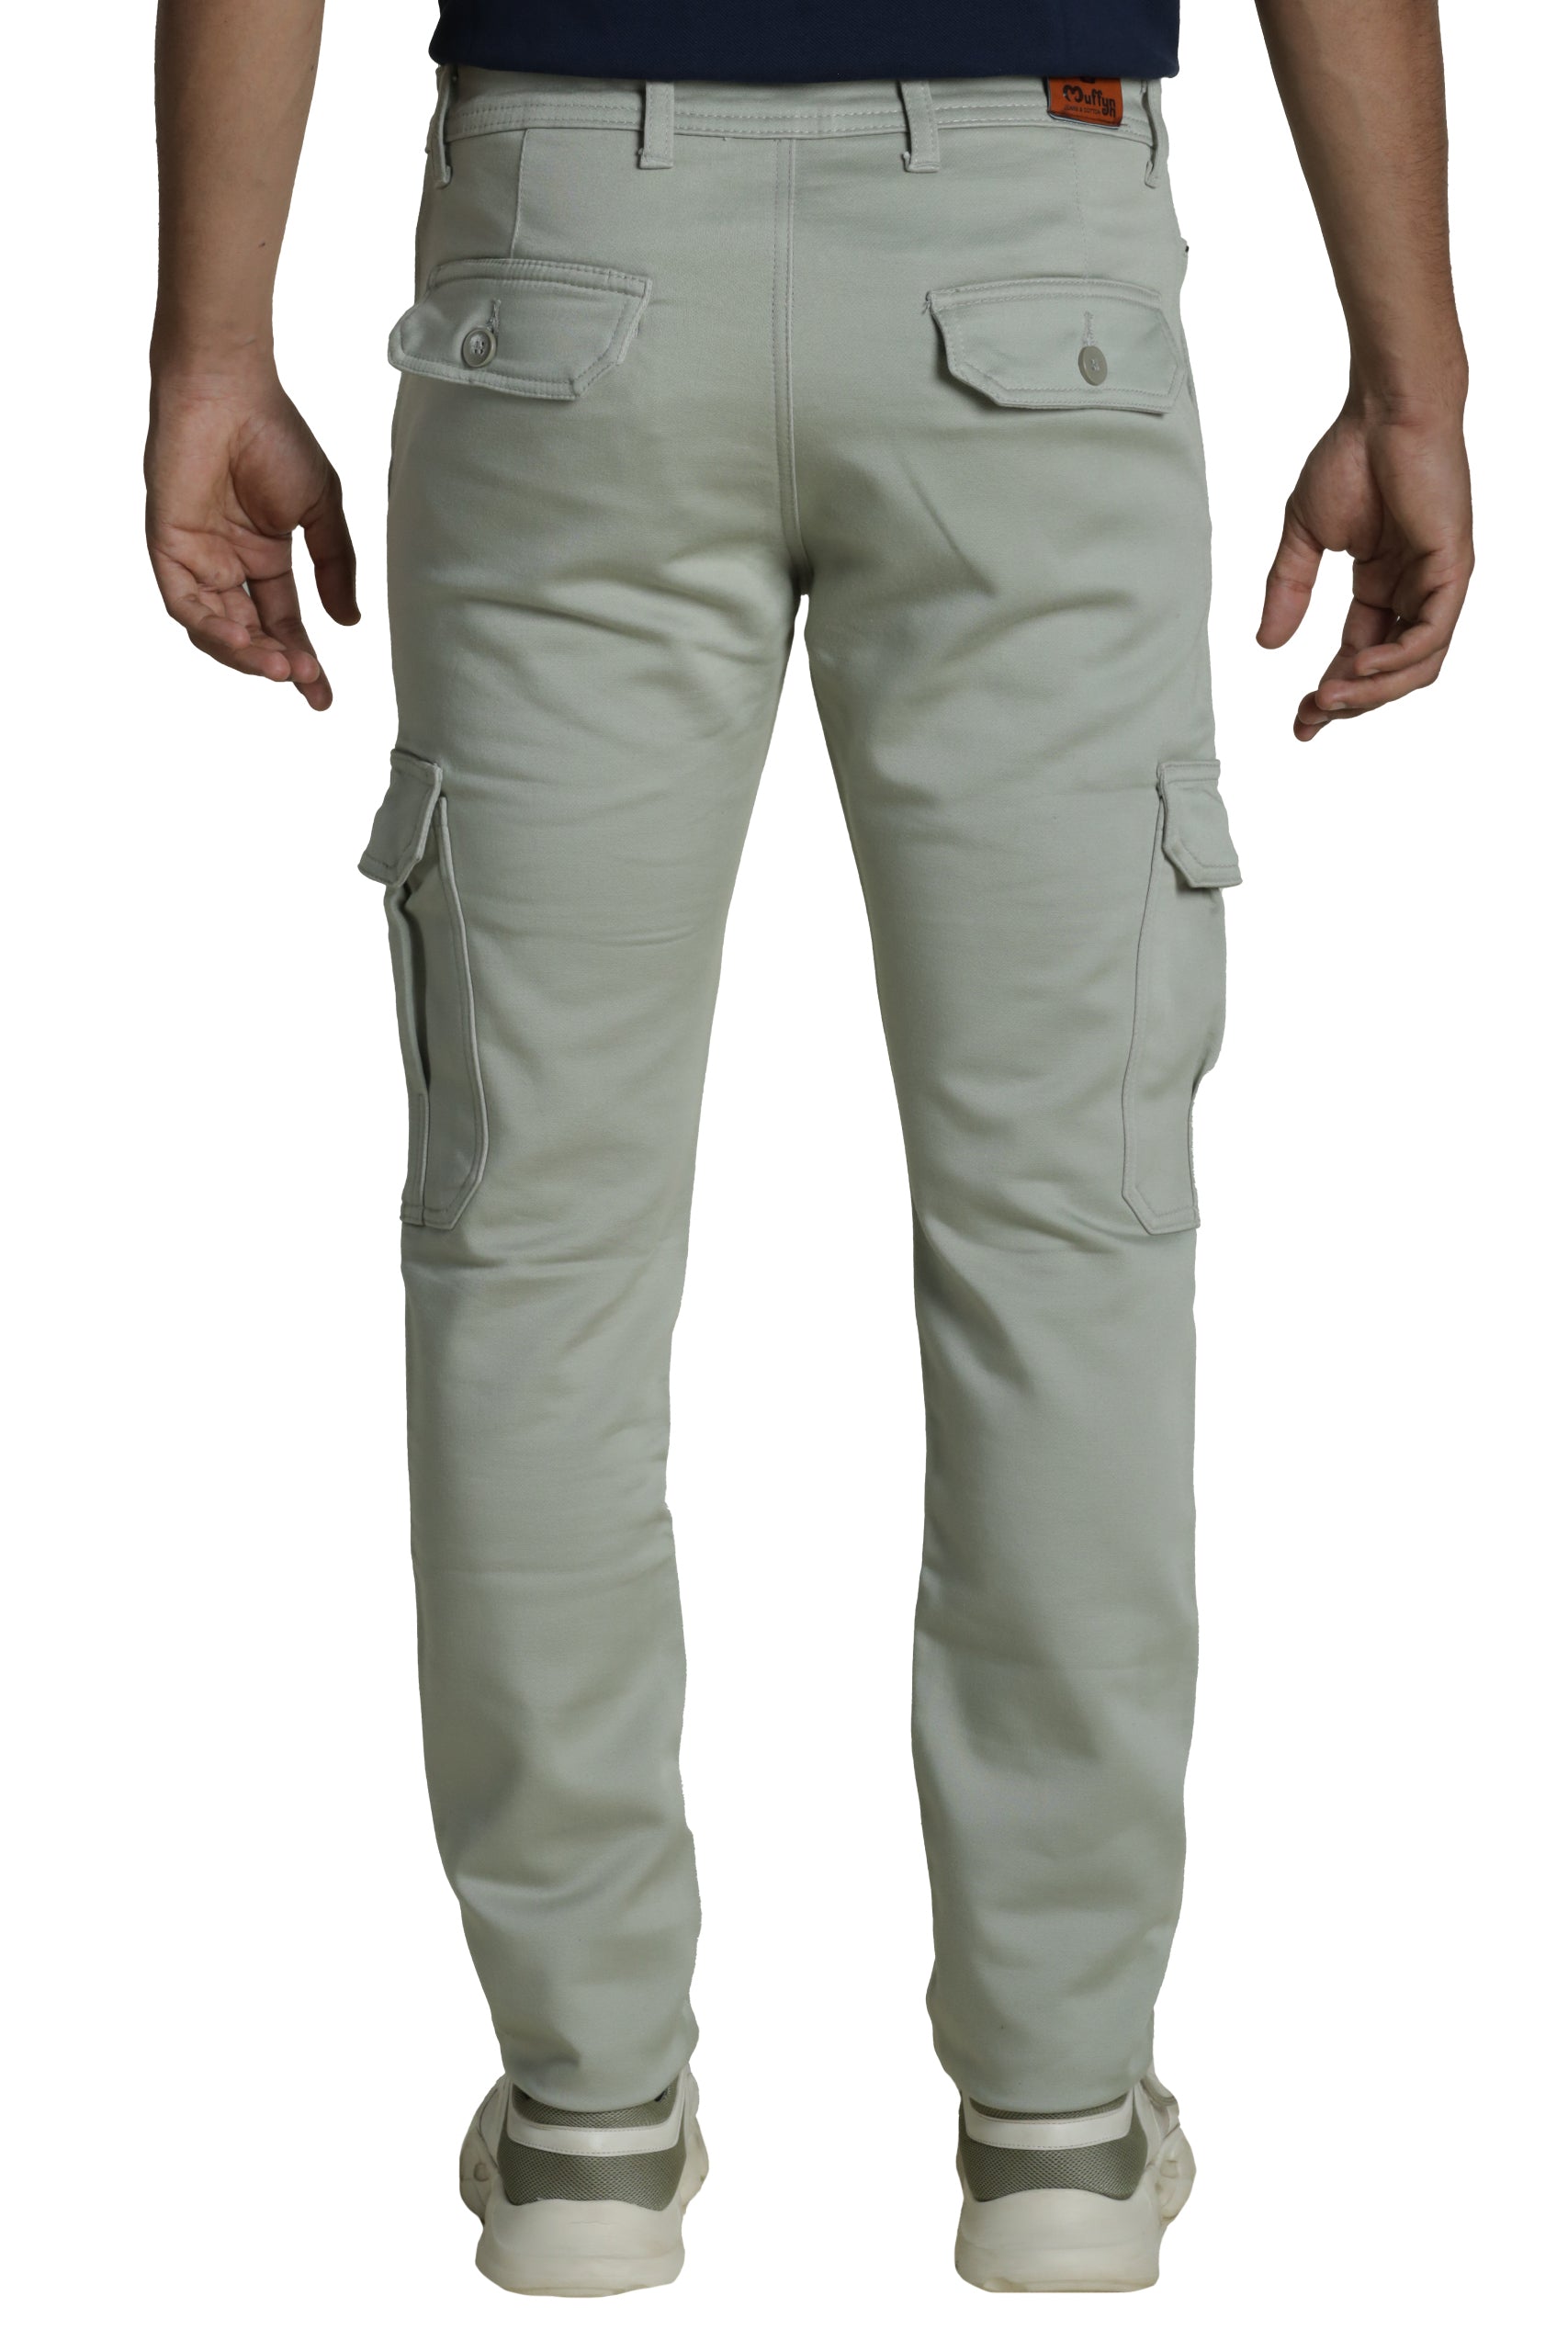 Buy Tan Brown Trousers & Pants for Men by Buda Jeans Co Online | Ajio.com